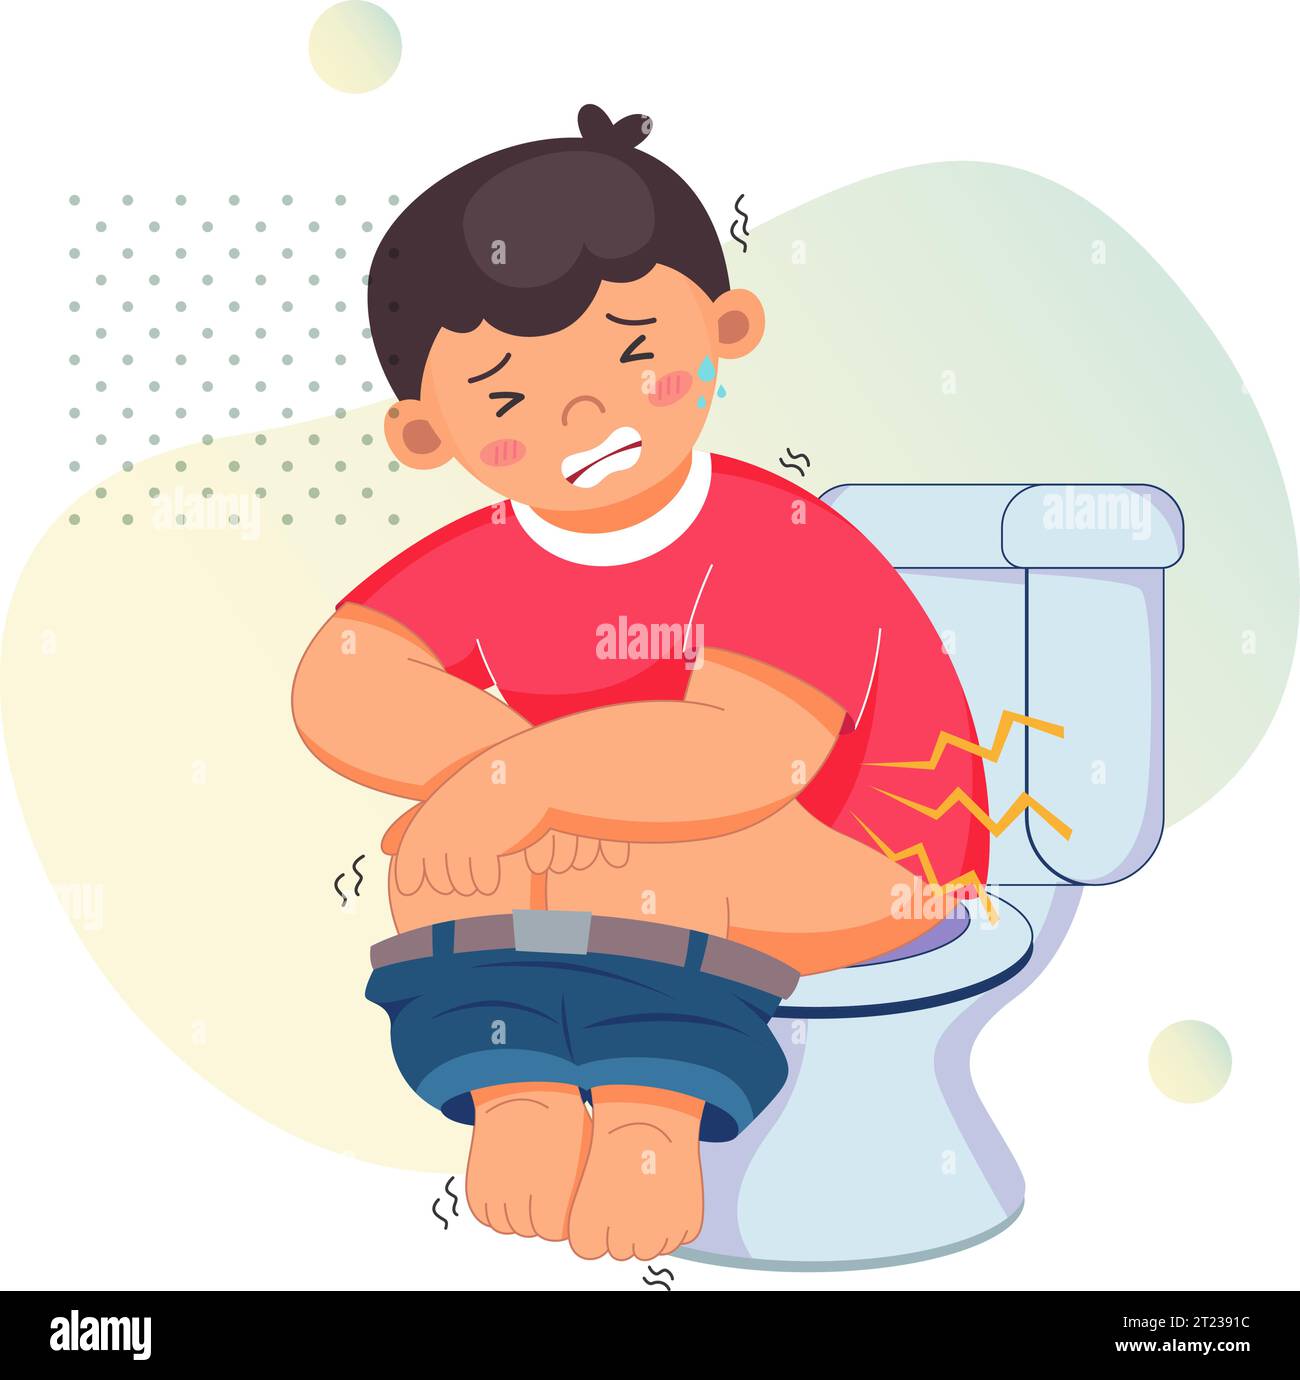 Constipation - Child Sitting on Toilet Seat - Stock Illustration as EPS 10 File Stock Vector